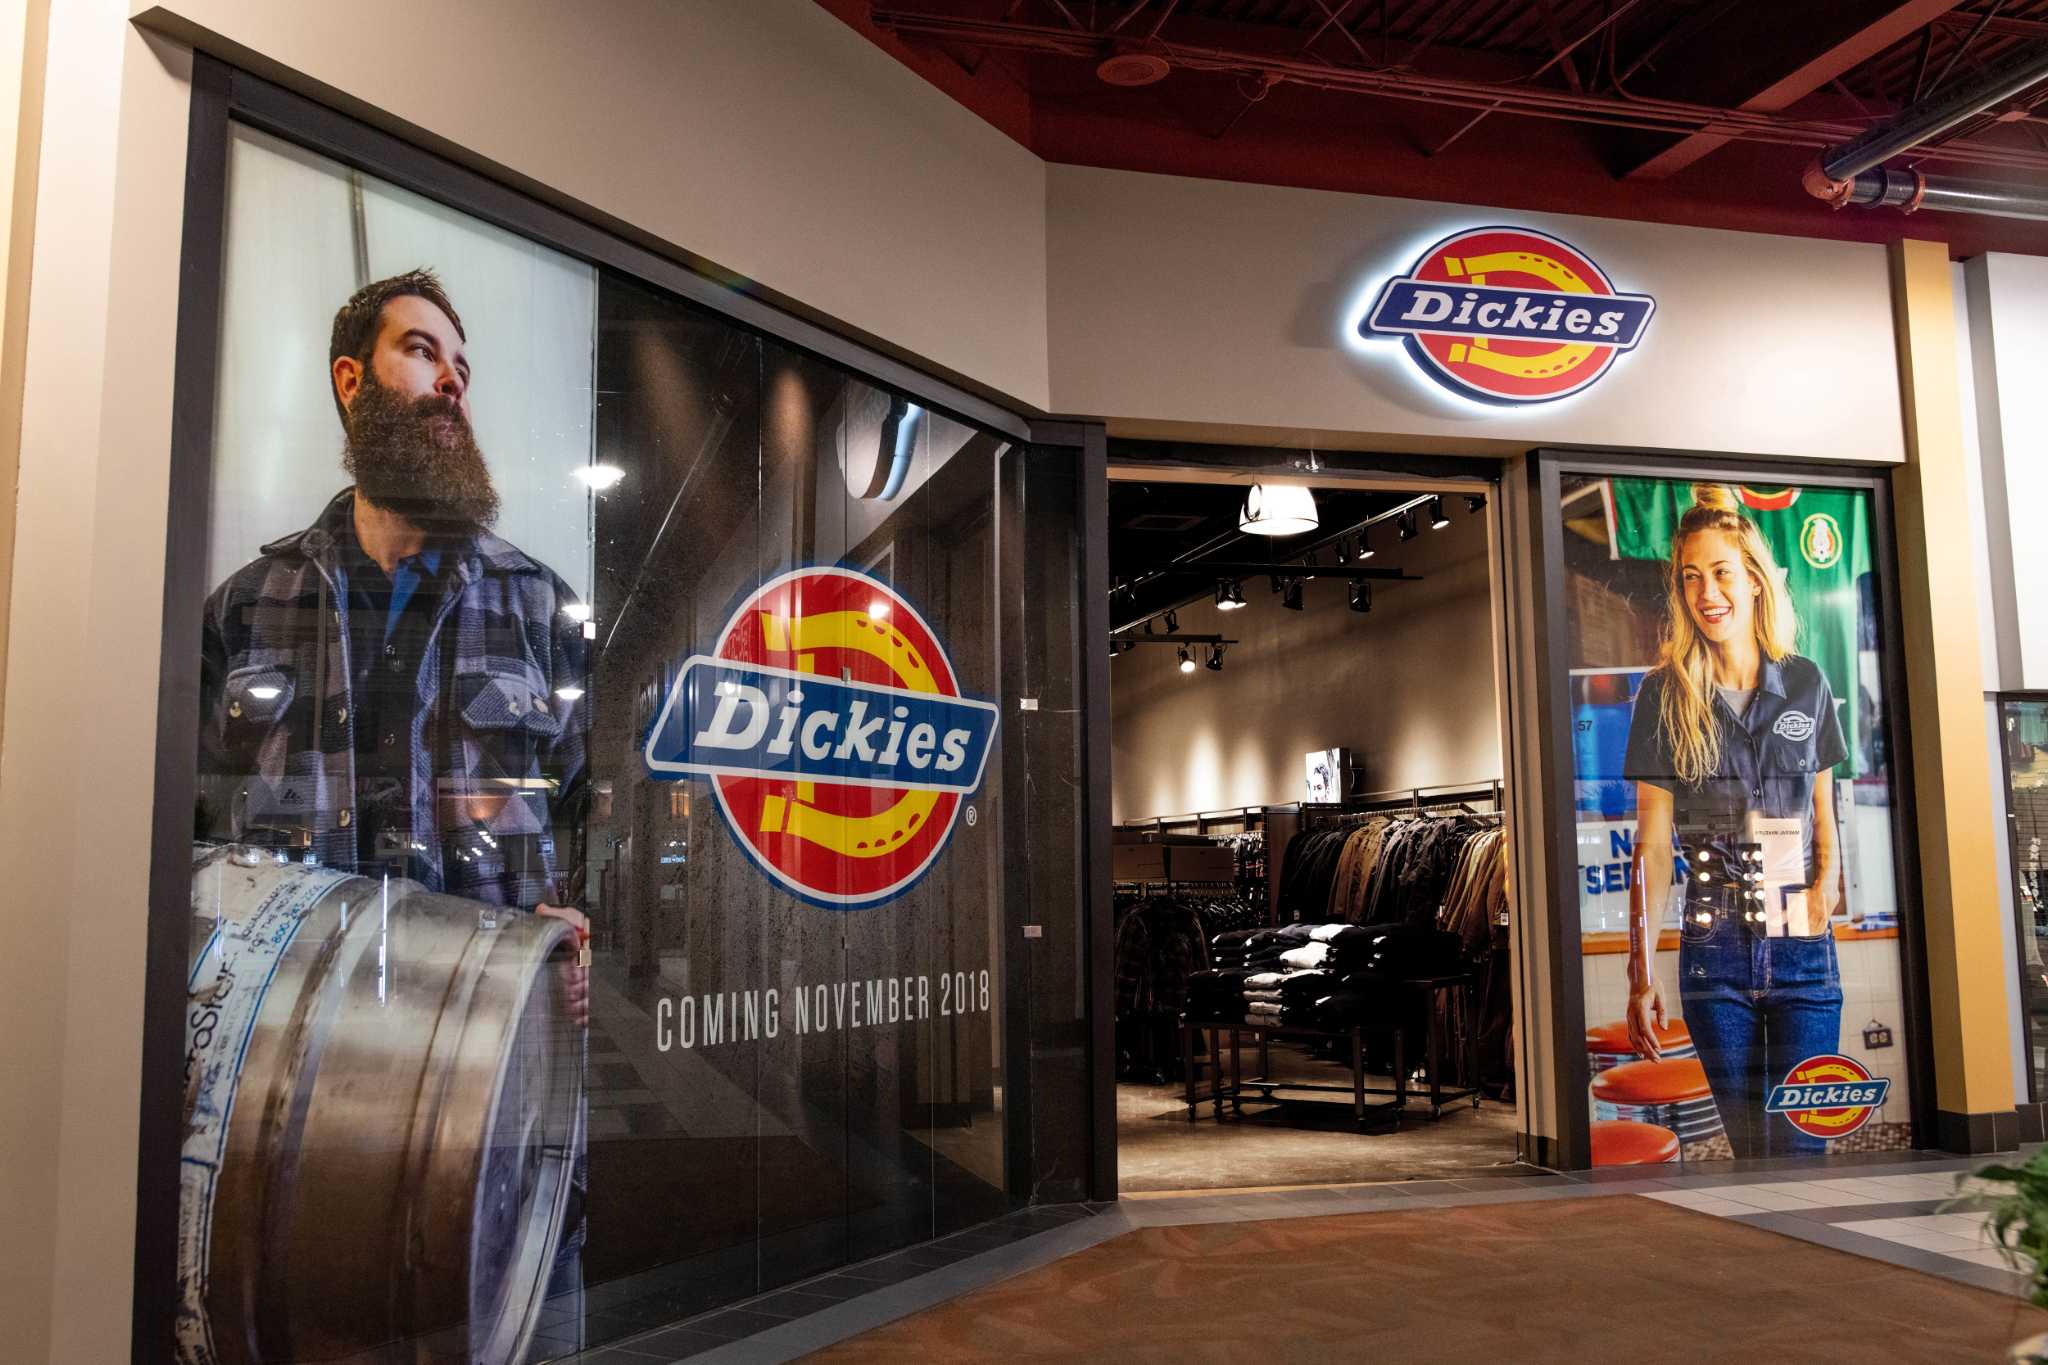 Dickies for its second Houston-area store